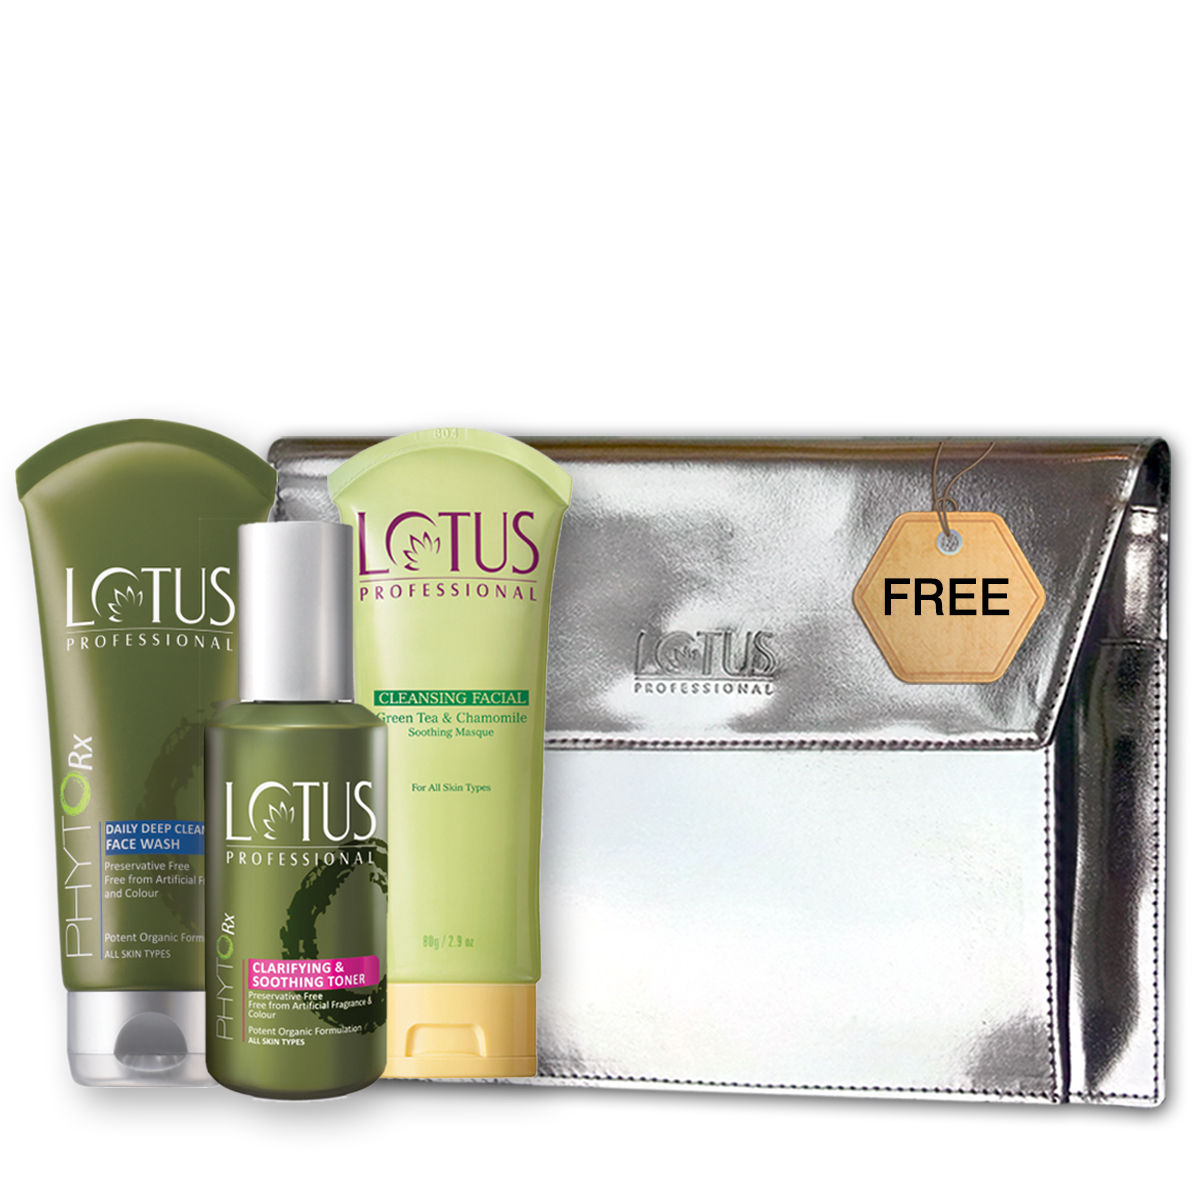 Buy Lotus Professional Complete Beauty Care Kit (Phyto-Rx Face Wash, Toner & Cleansing Facial with free Clutch Bag) - Purplle